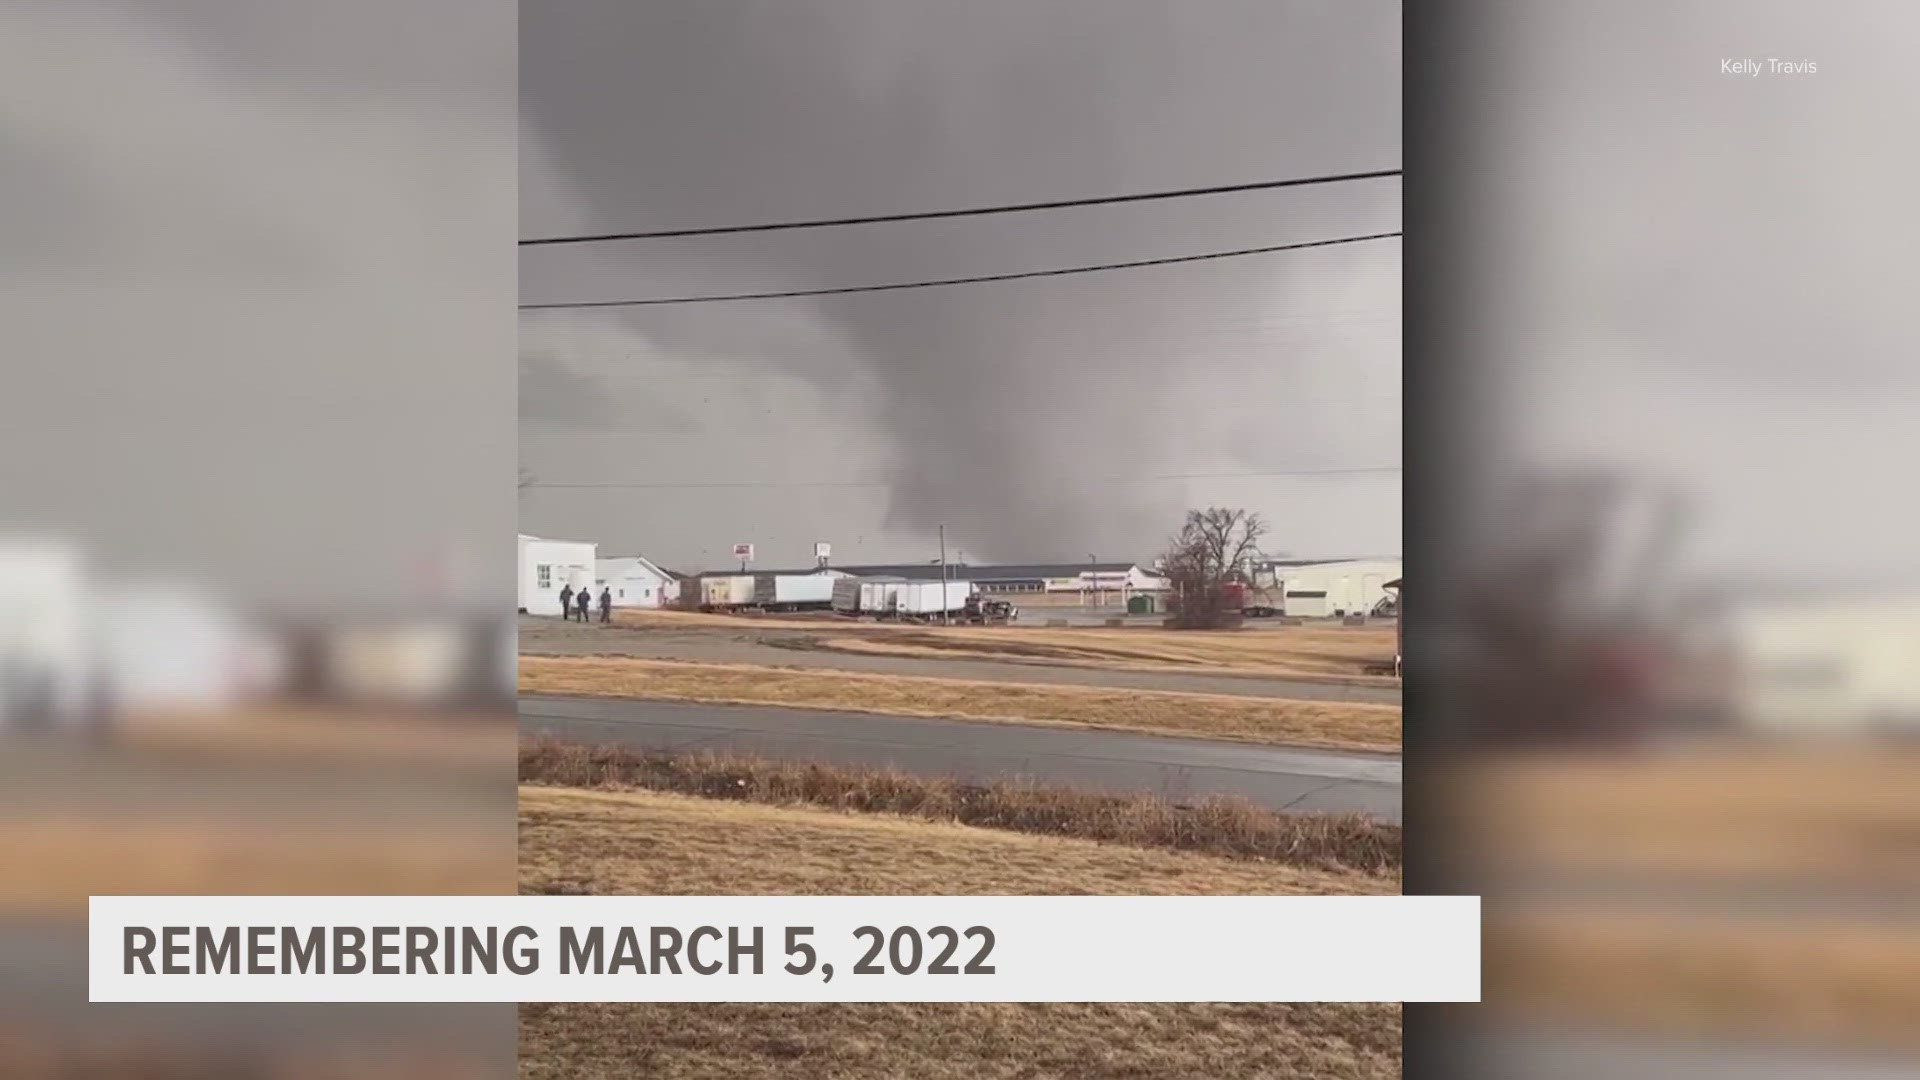 Two years have passed since the March 5, 2022 tornado outbreak.